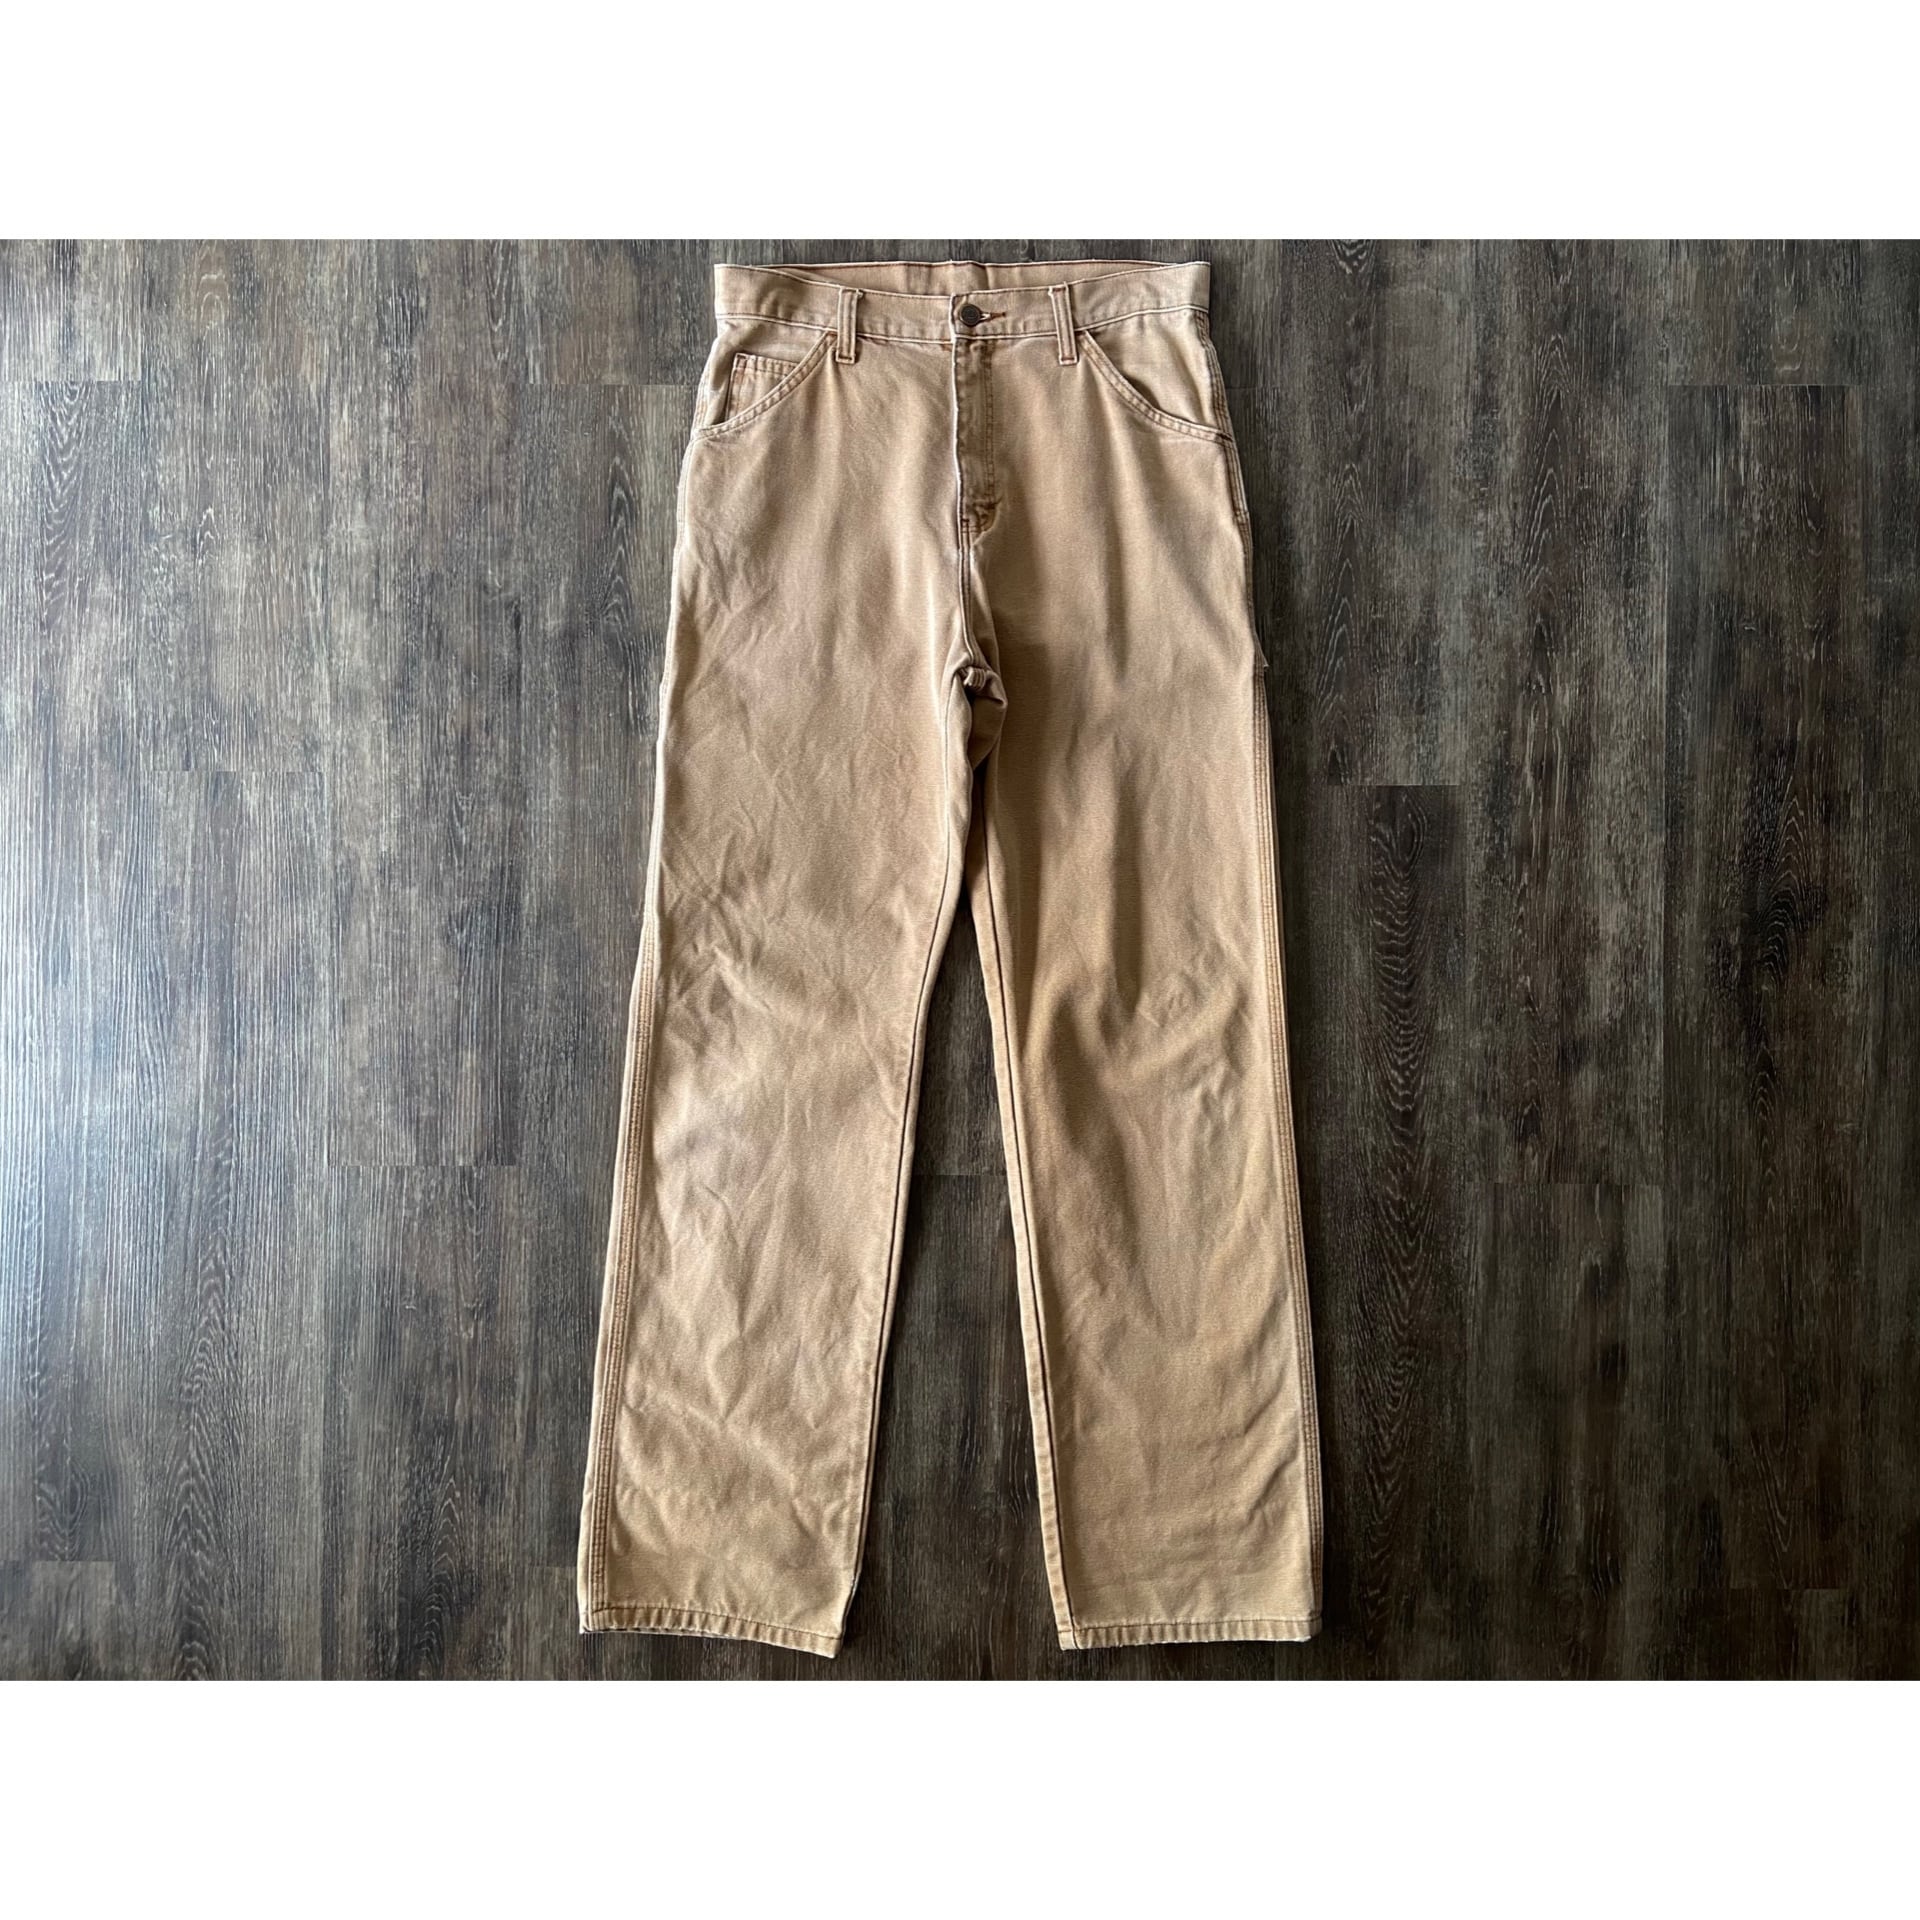 80s levi's 517 corduroy pants W30 L31 “Made in USA” リーバイス 